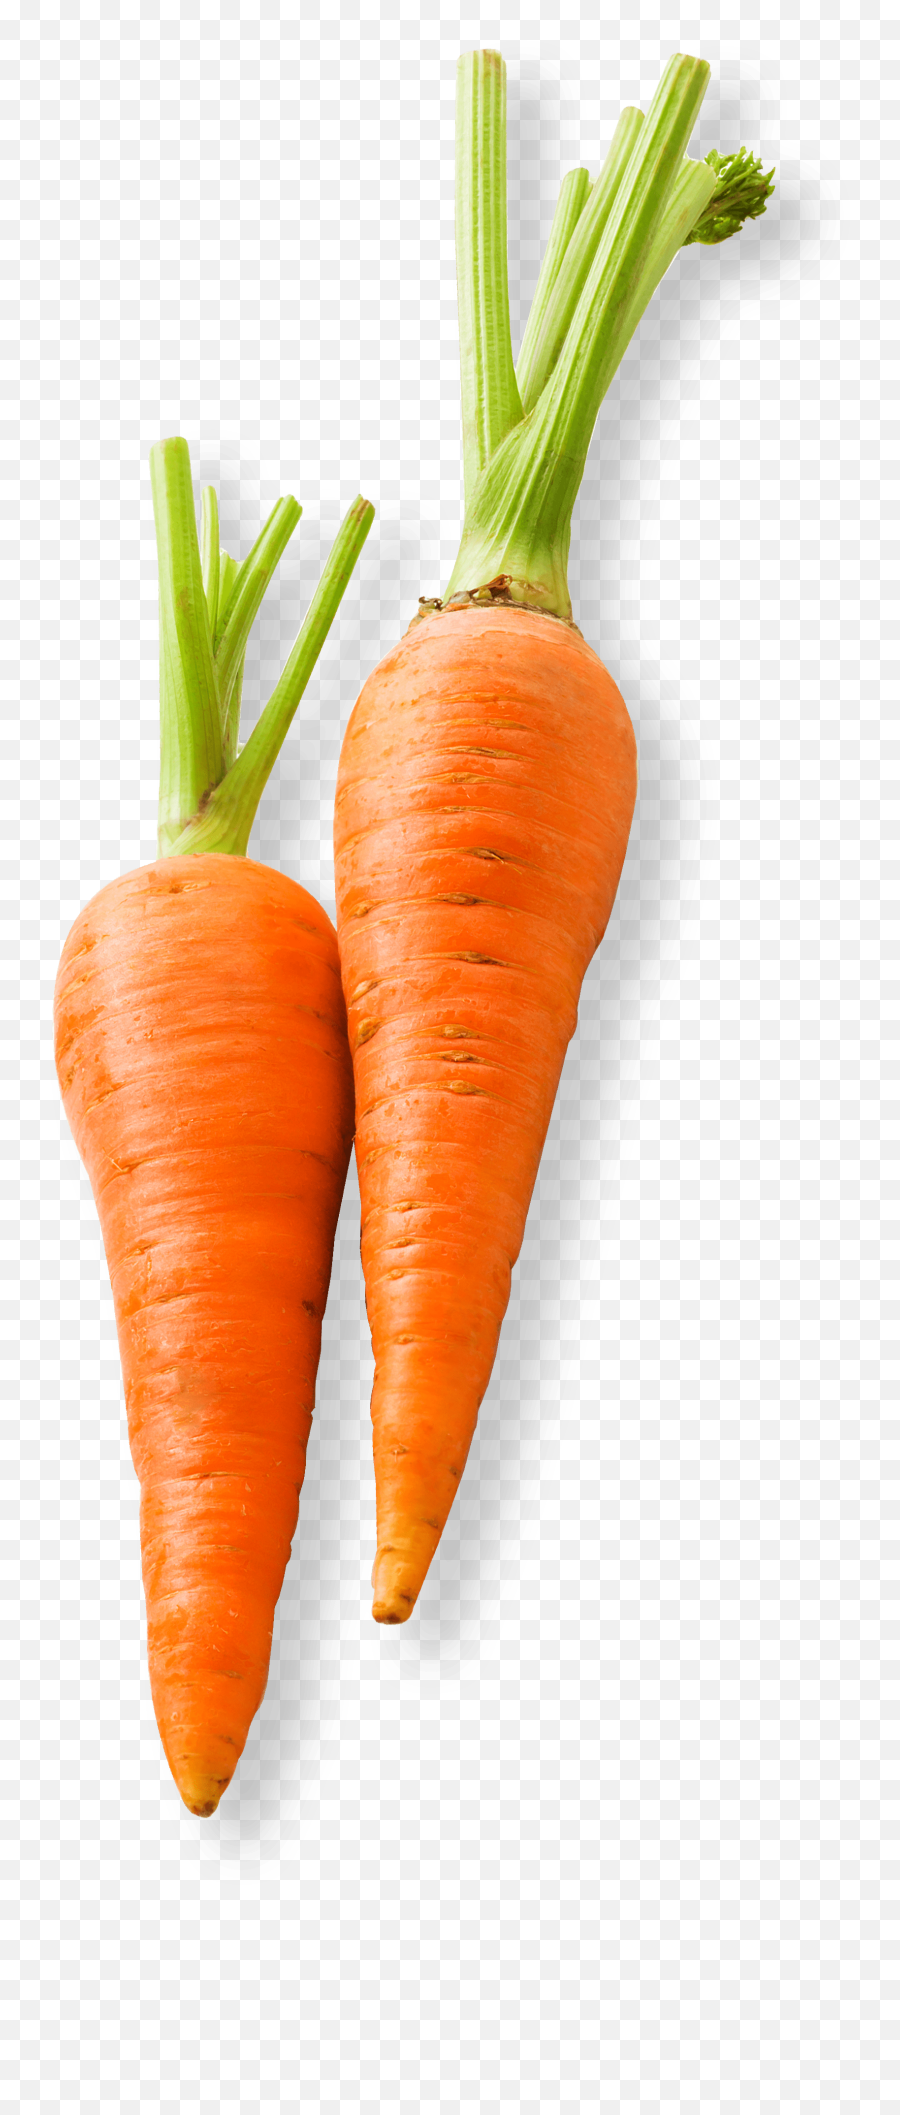 Baby Carrot Vegetable Food Cake - Carrot Png Download Food,Carrot Transparent Background